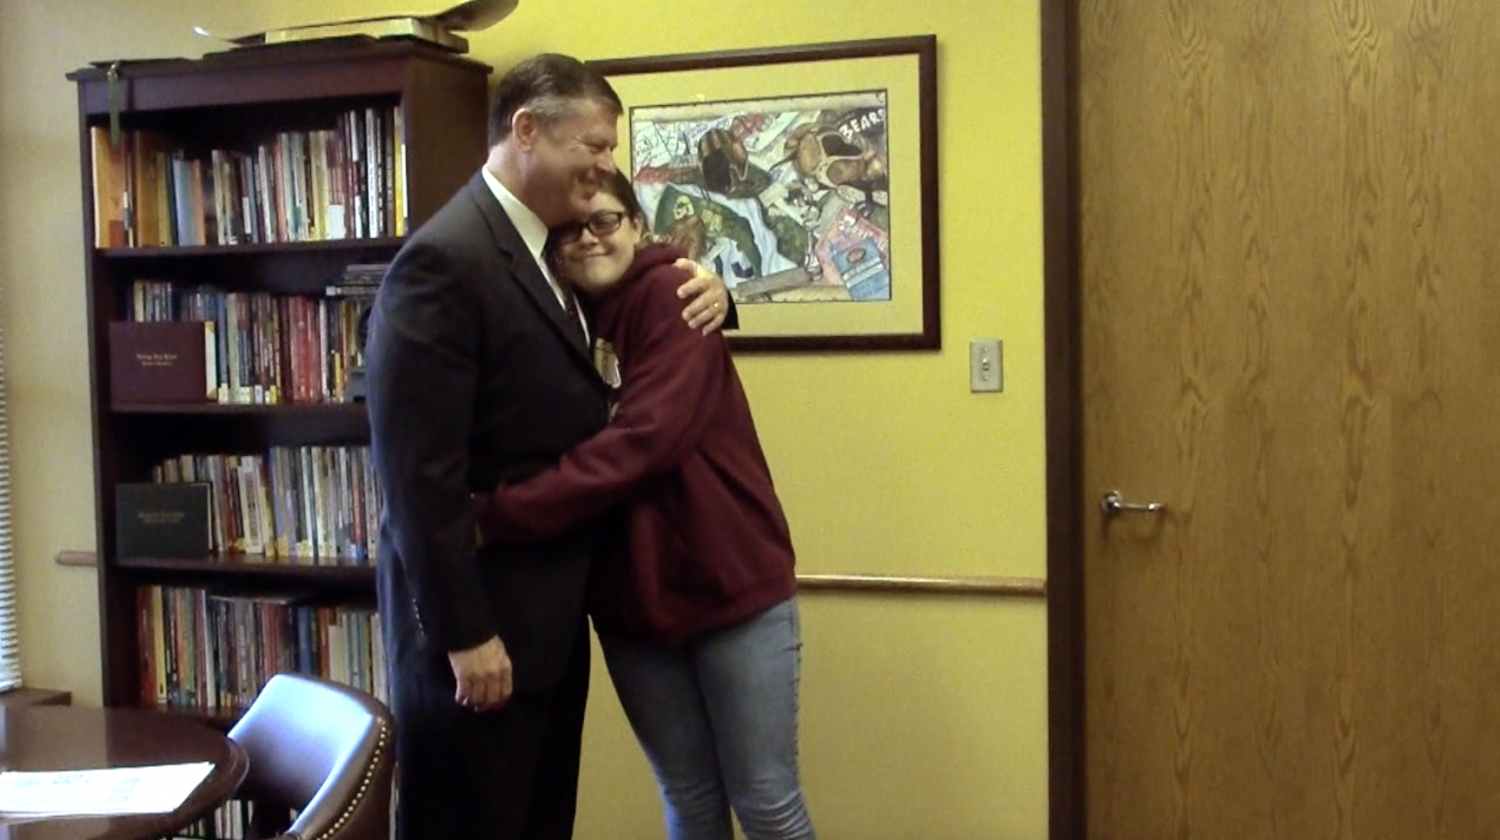 Mr. Mimms and Jillian share a special father-daughter moment together while visiting before school.